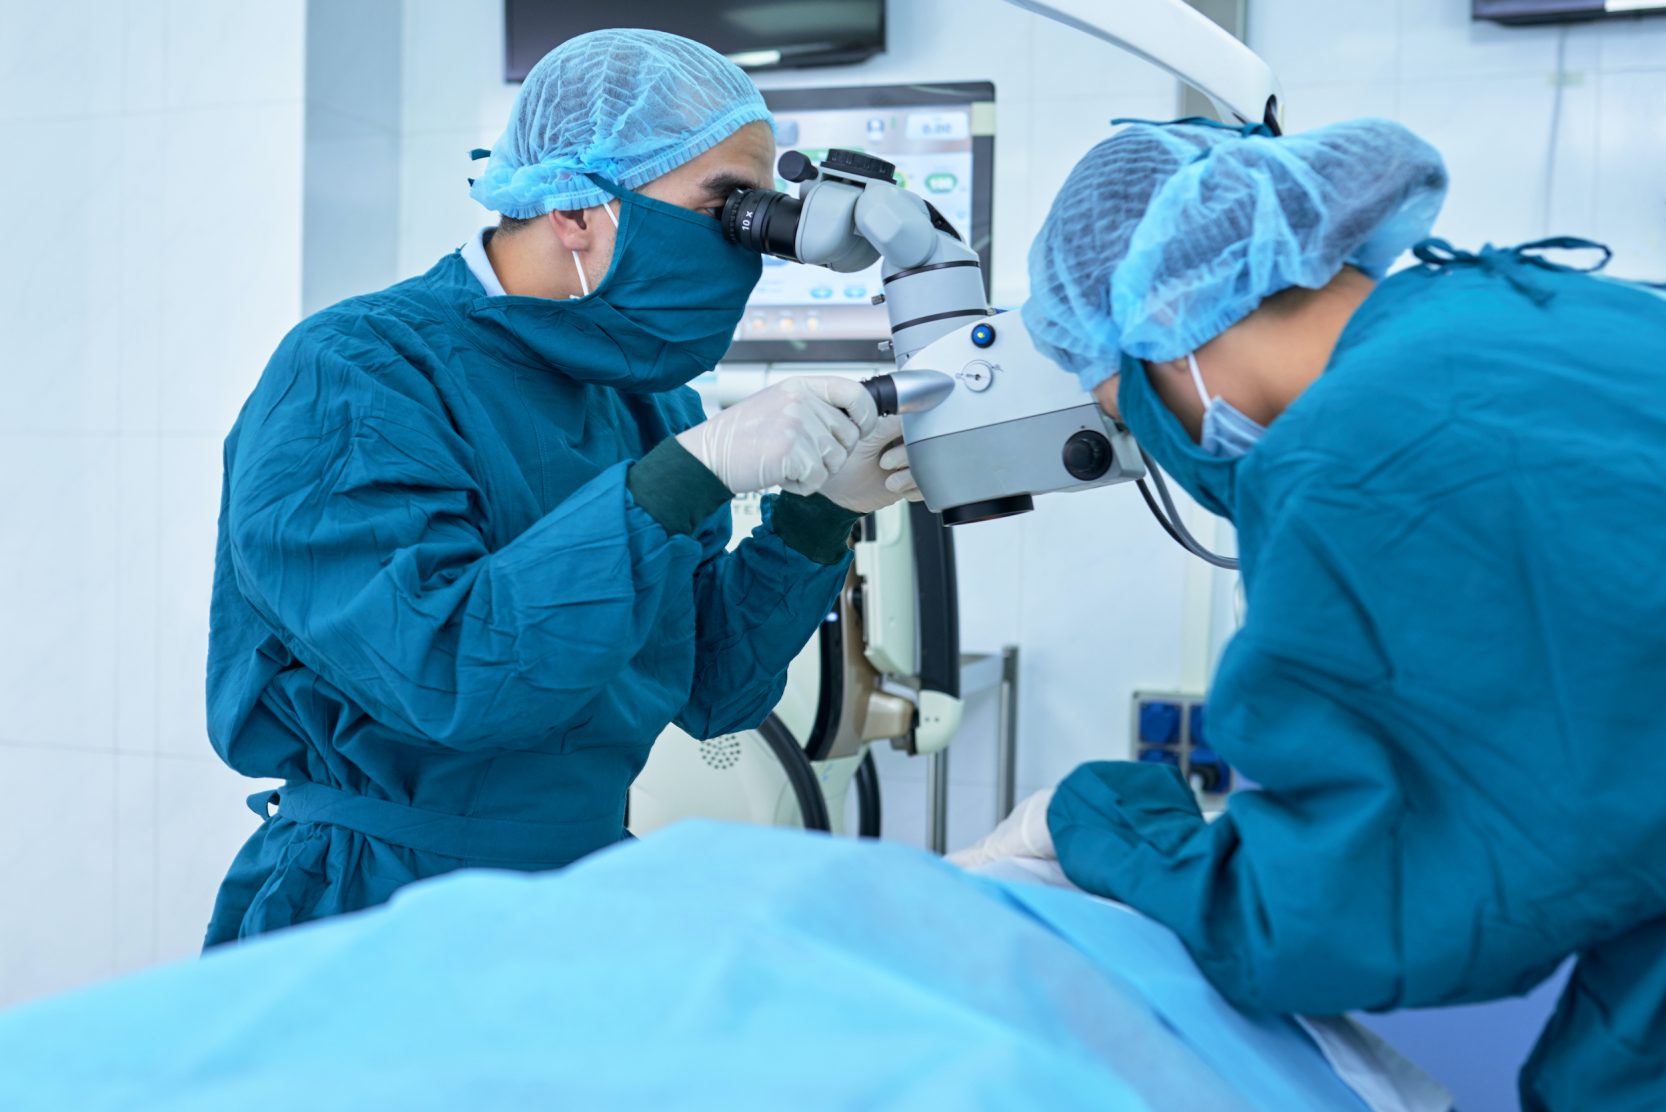 HMC performs surgery to remove a brain tumor on a patient while awake